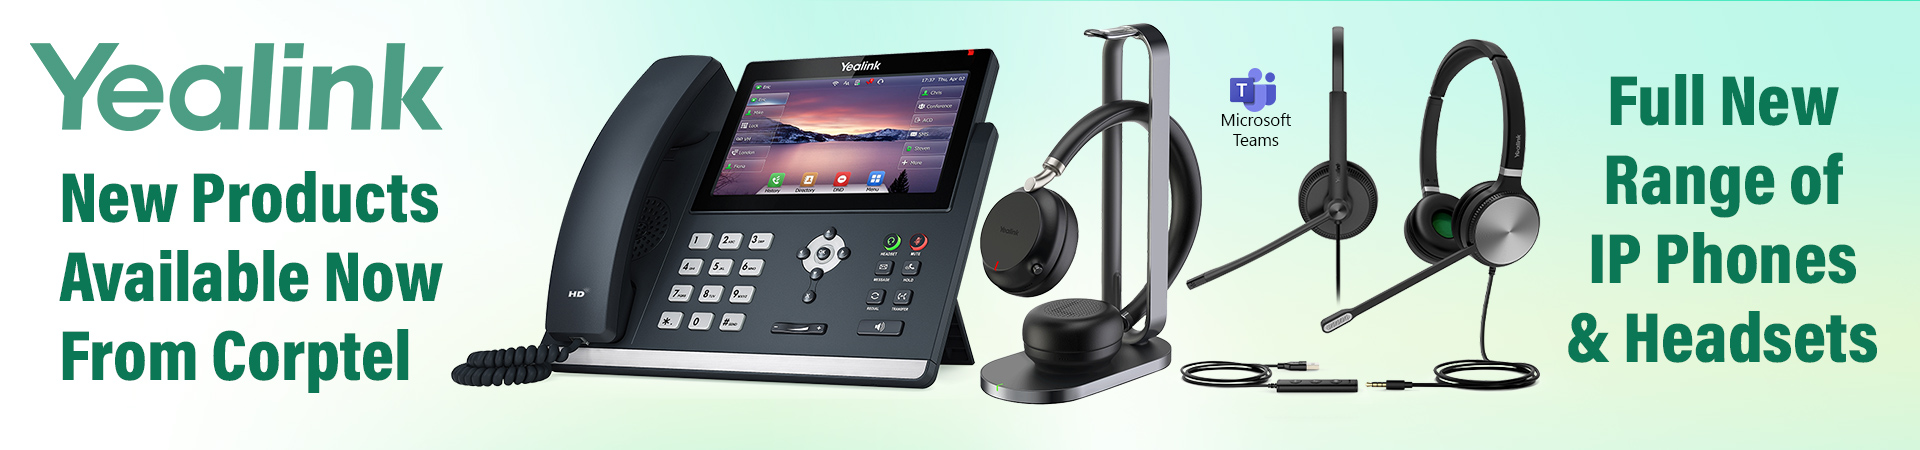 Yealink - New Products Available Now From Corptel - Full New Range of IP Phones & Headsets